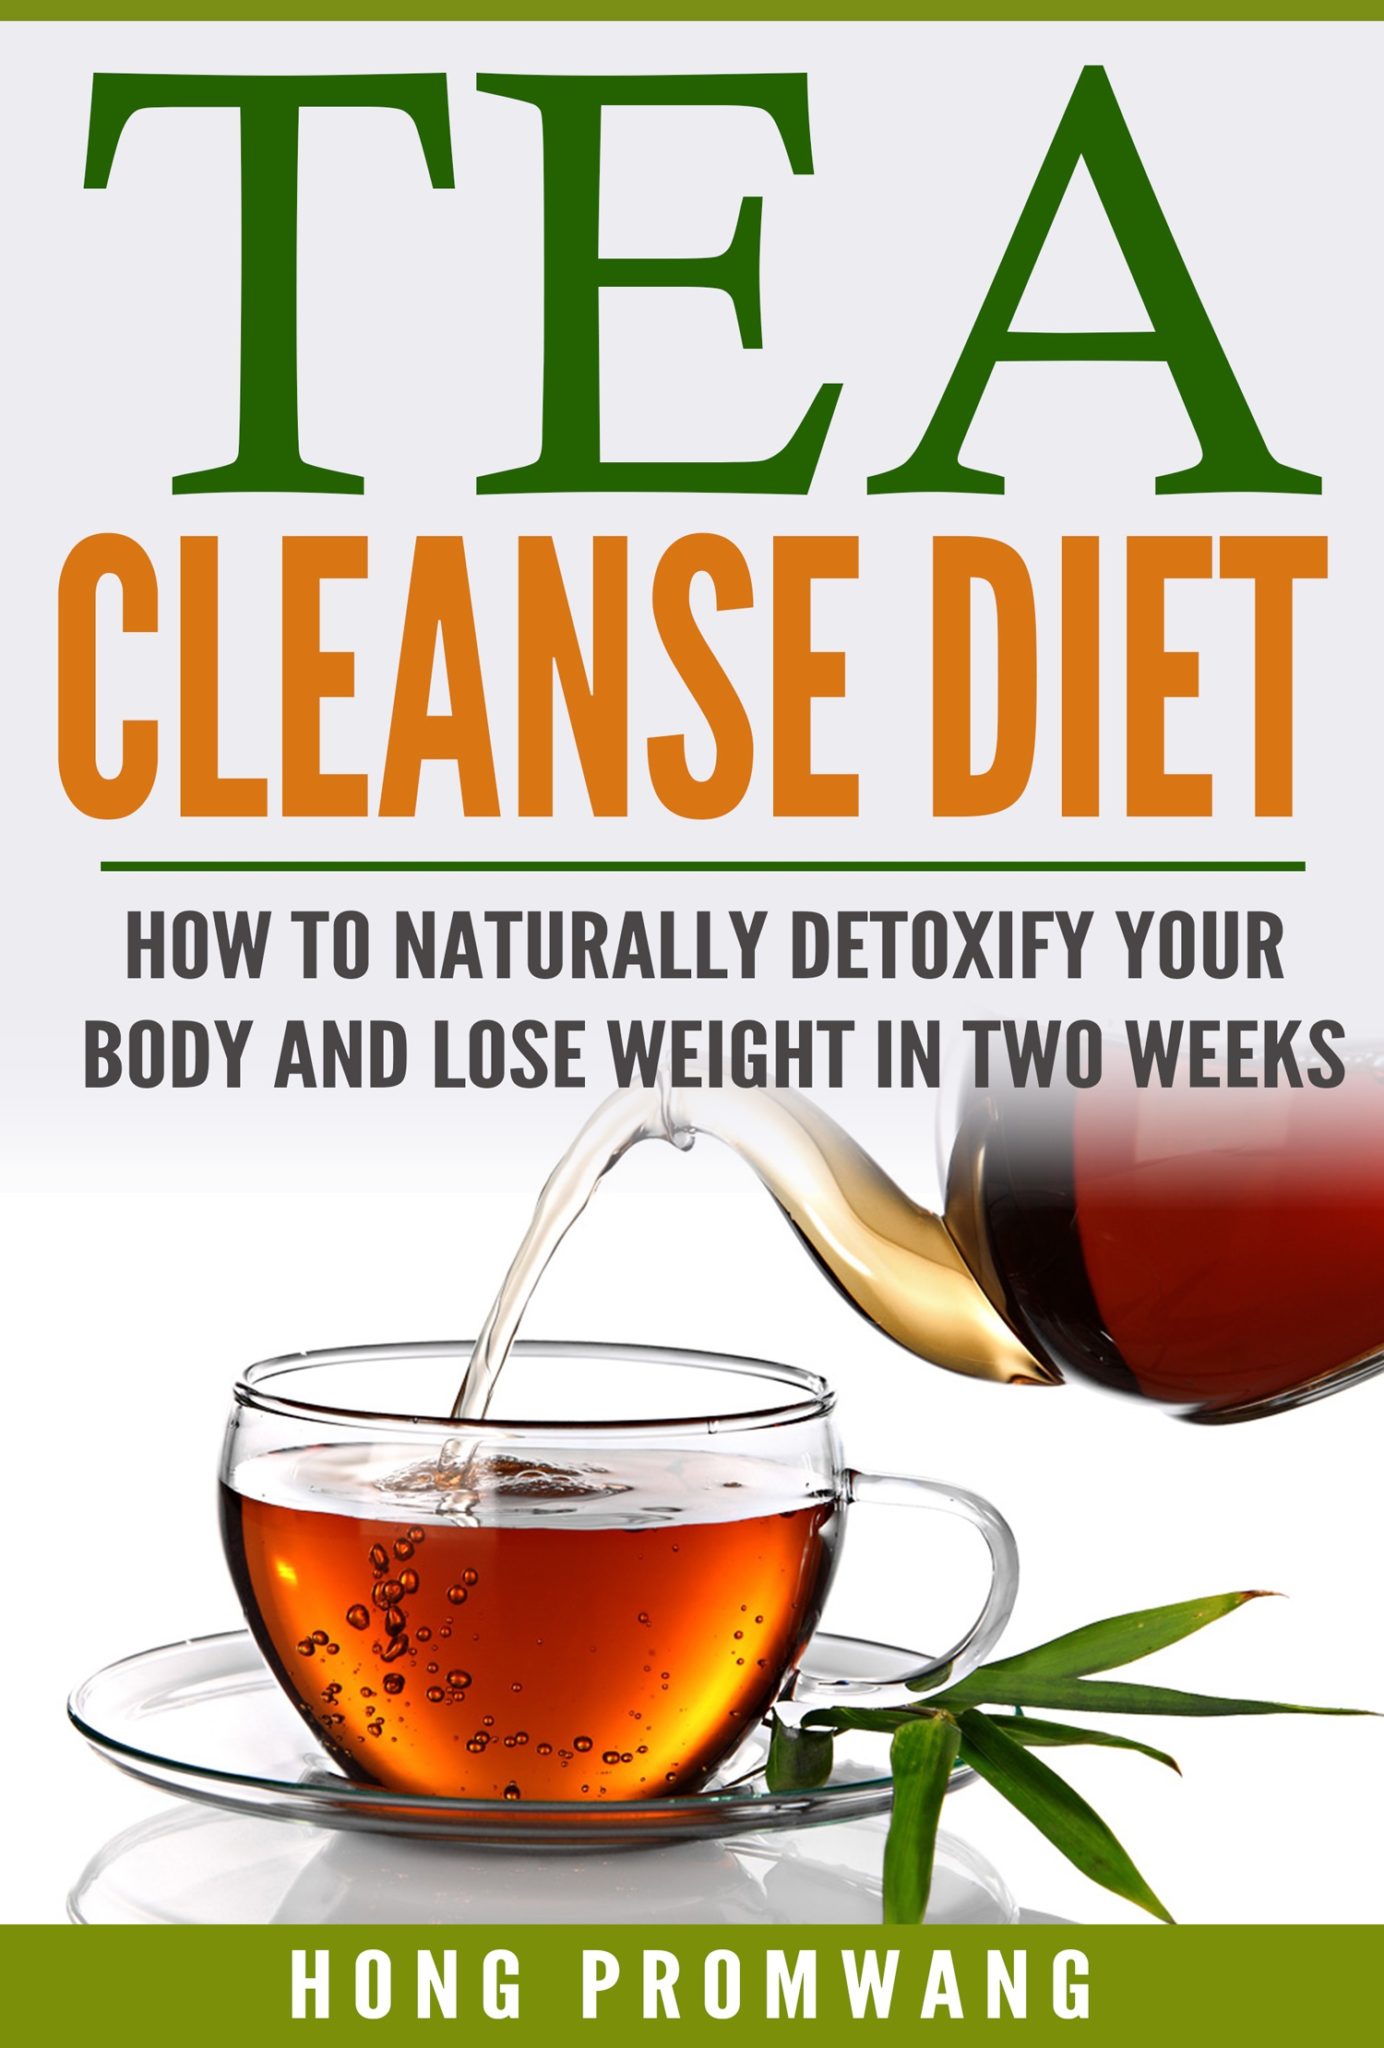 FREE: Tea Cleanse Diet: How to Naturally Detoxify Your Body and Lose Weight in Two Weeks by Hong Promwang